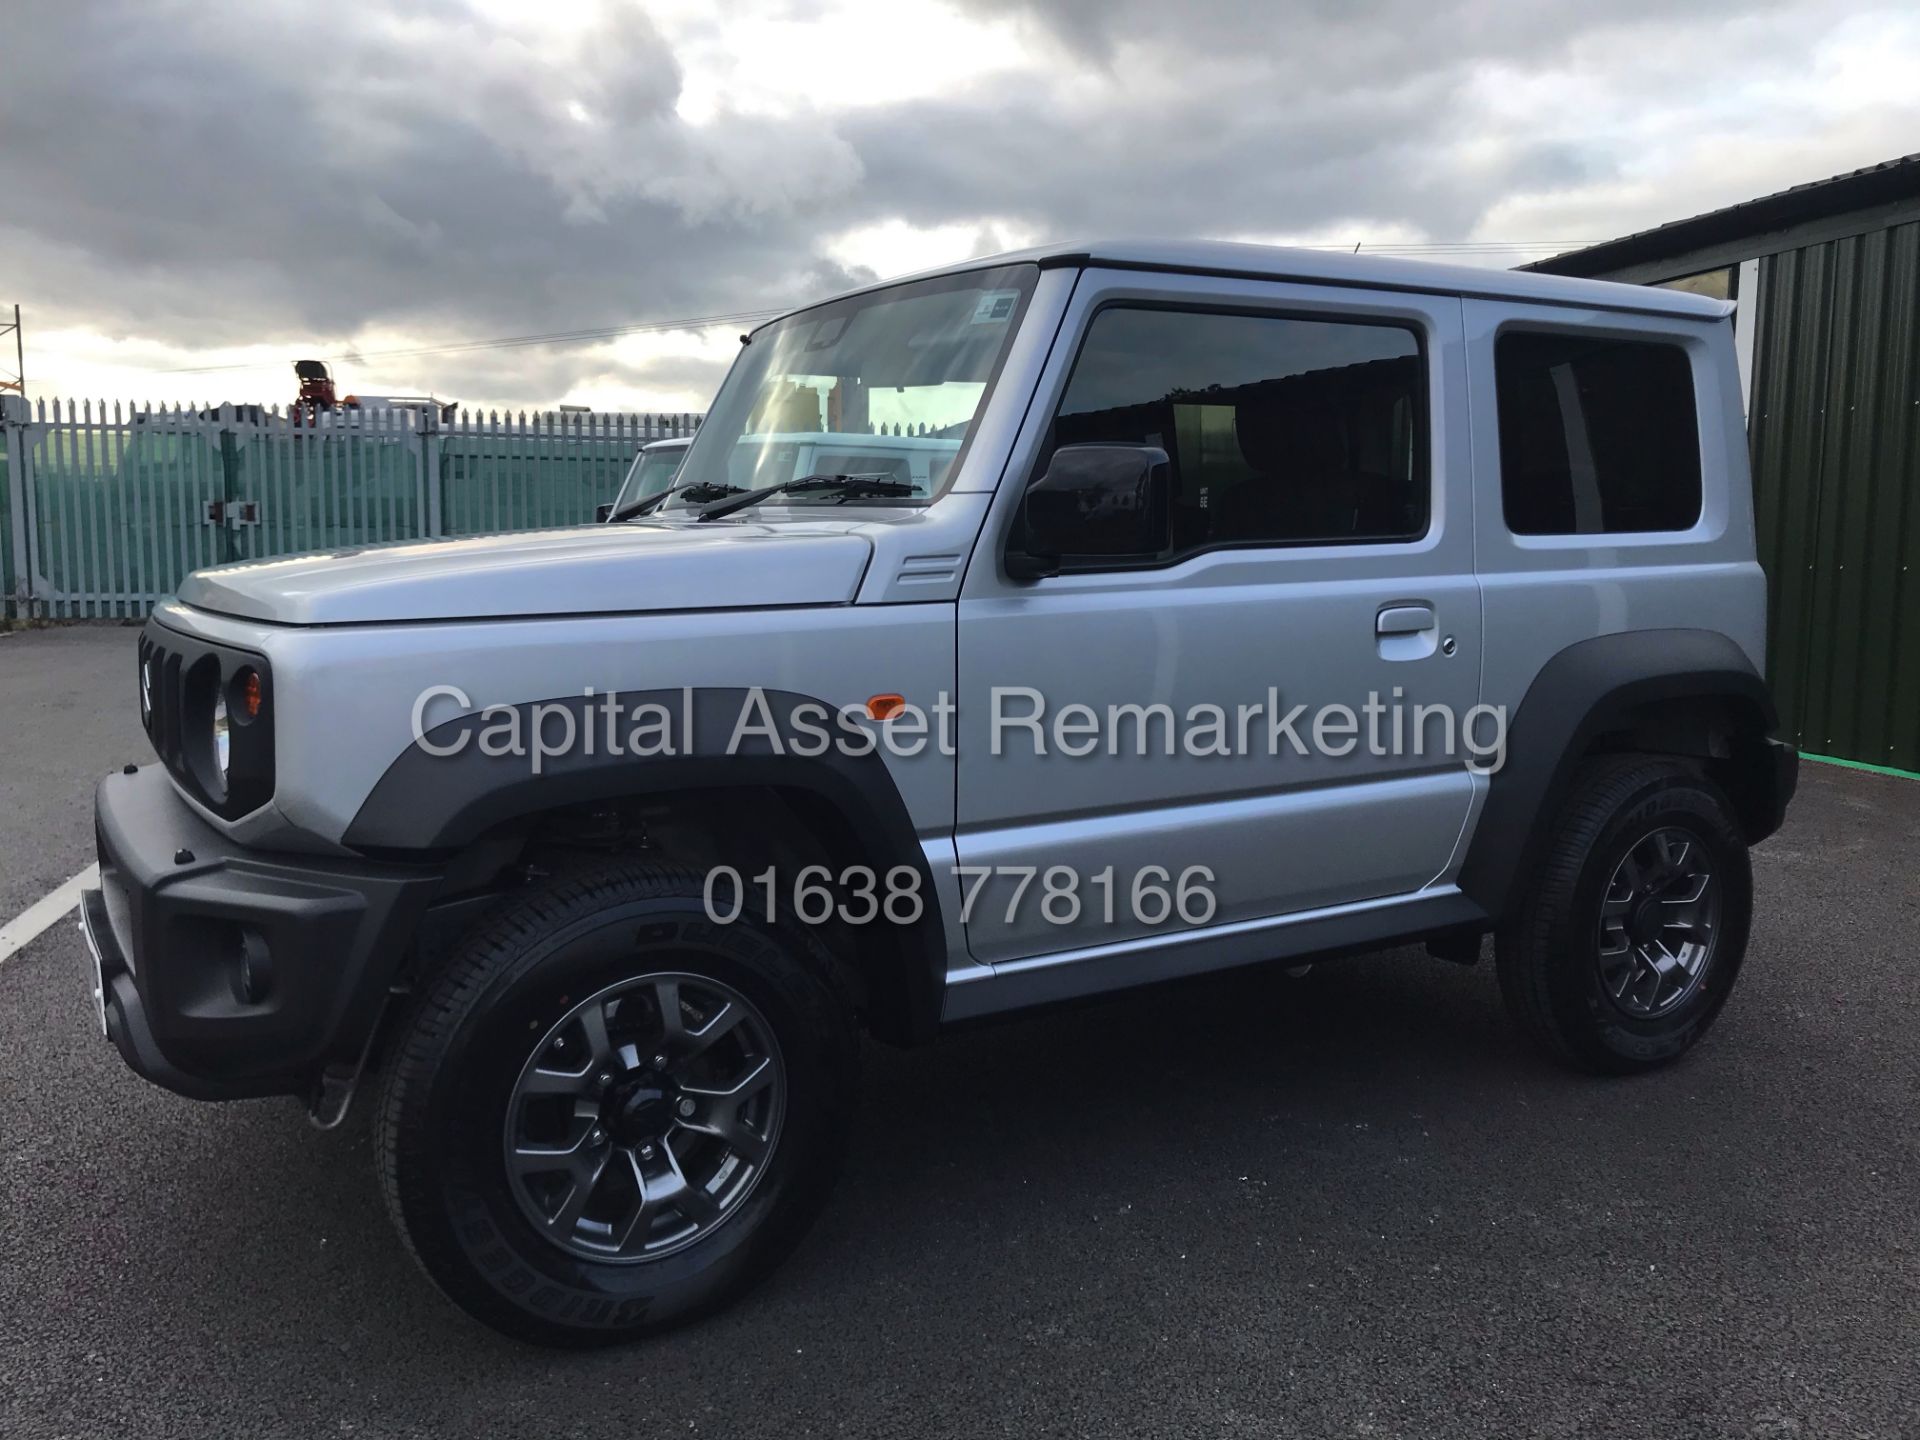 ON SALE SUZUKI JIMNY "ALLGRIP PRO" (ALL NEW MODEL) 1 OWNER (70 REG) DELIVERY MILEAGE - GREAT SPEC - Image 2 of 11